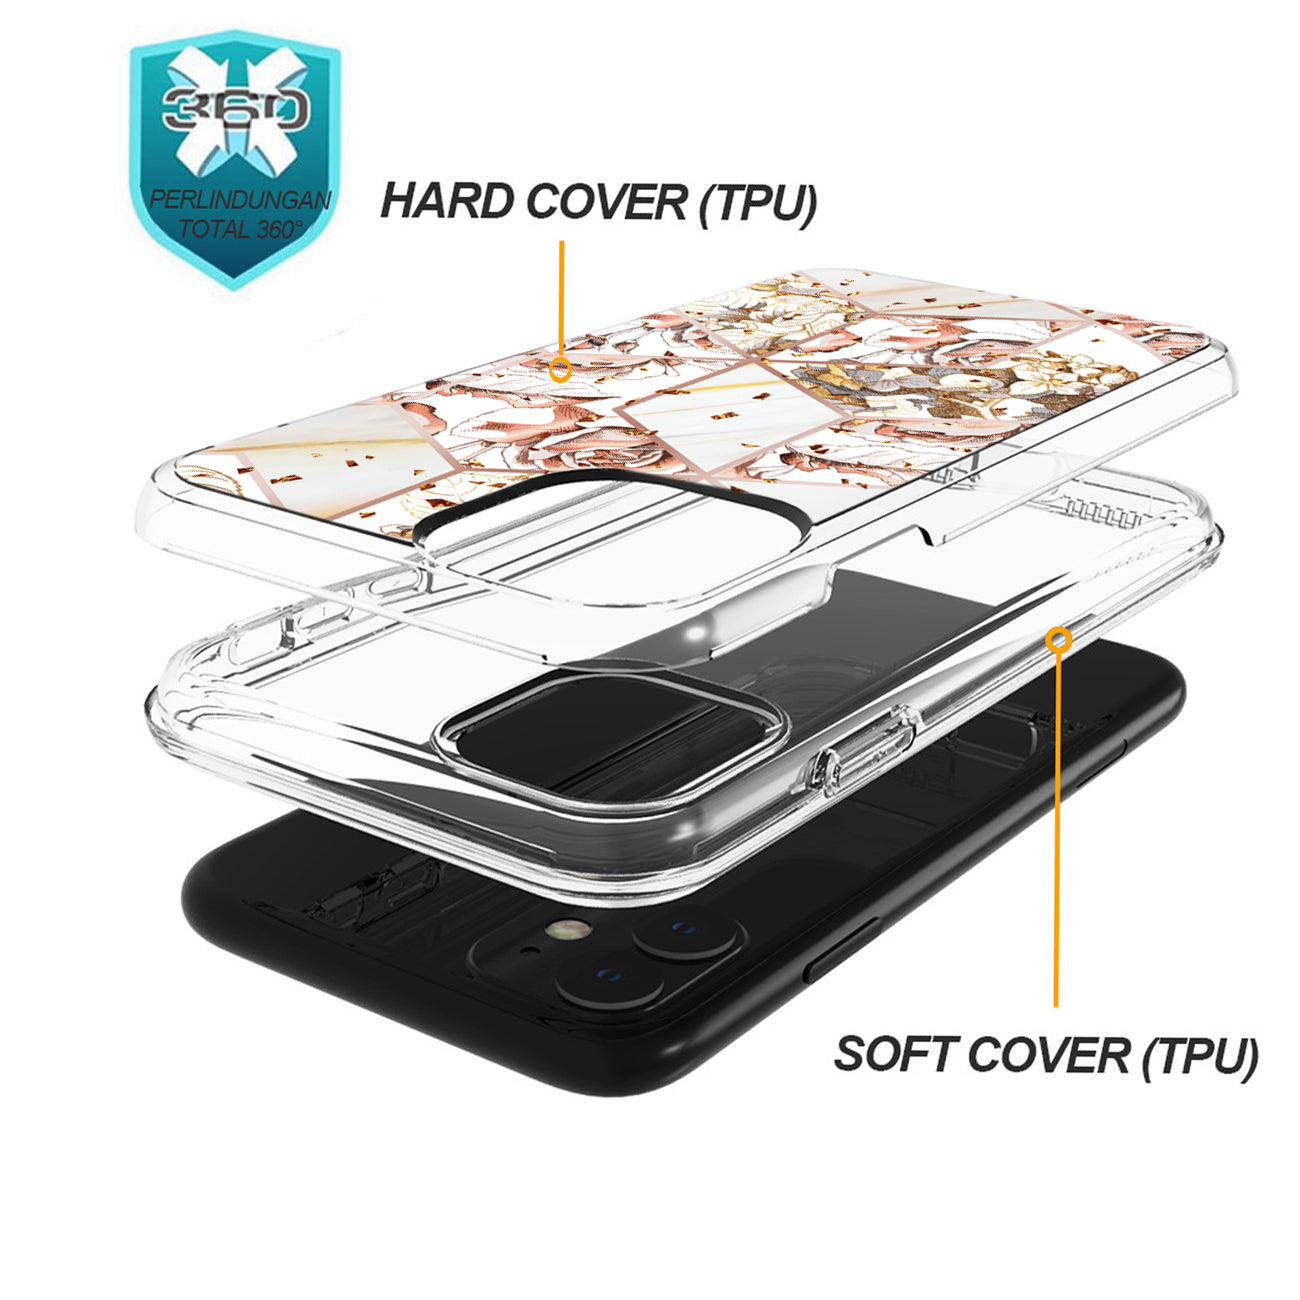 Flower Design Dual Layer Hybrid Hard & Soft TPU Rubber Case for IPH 11 In White Base Flower